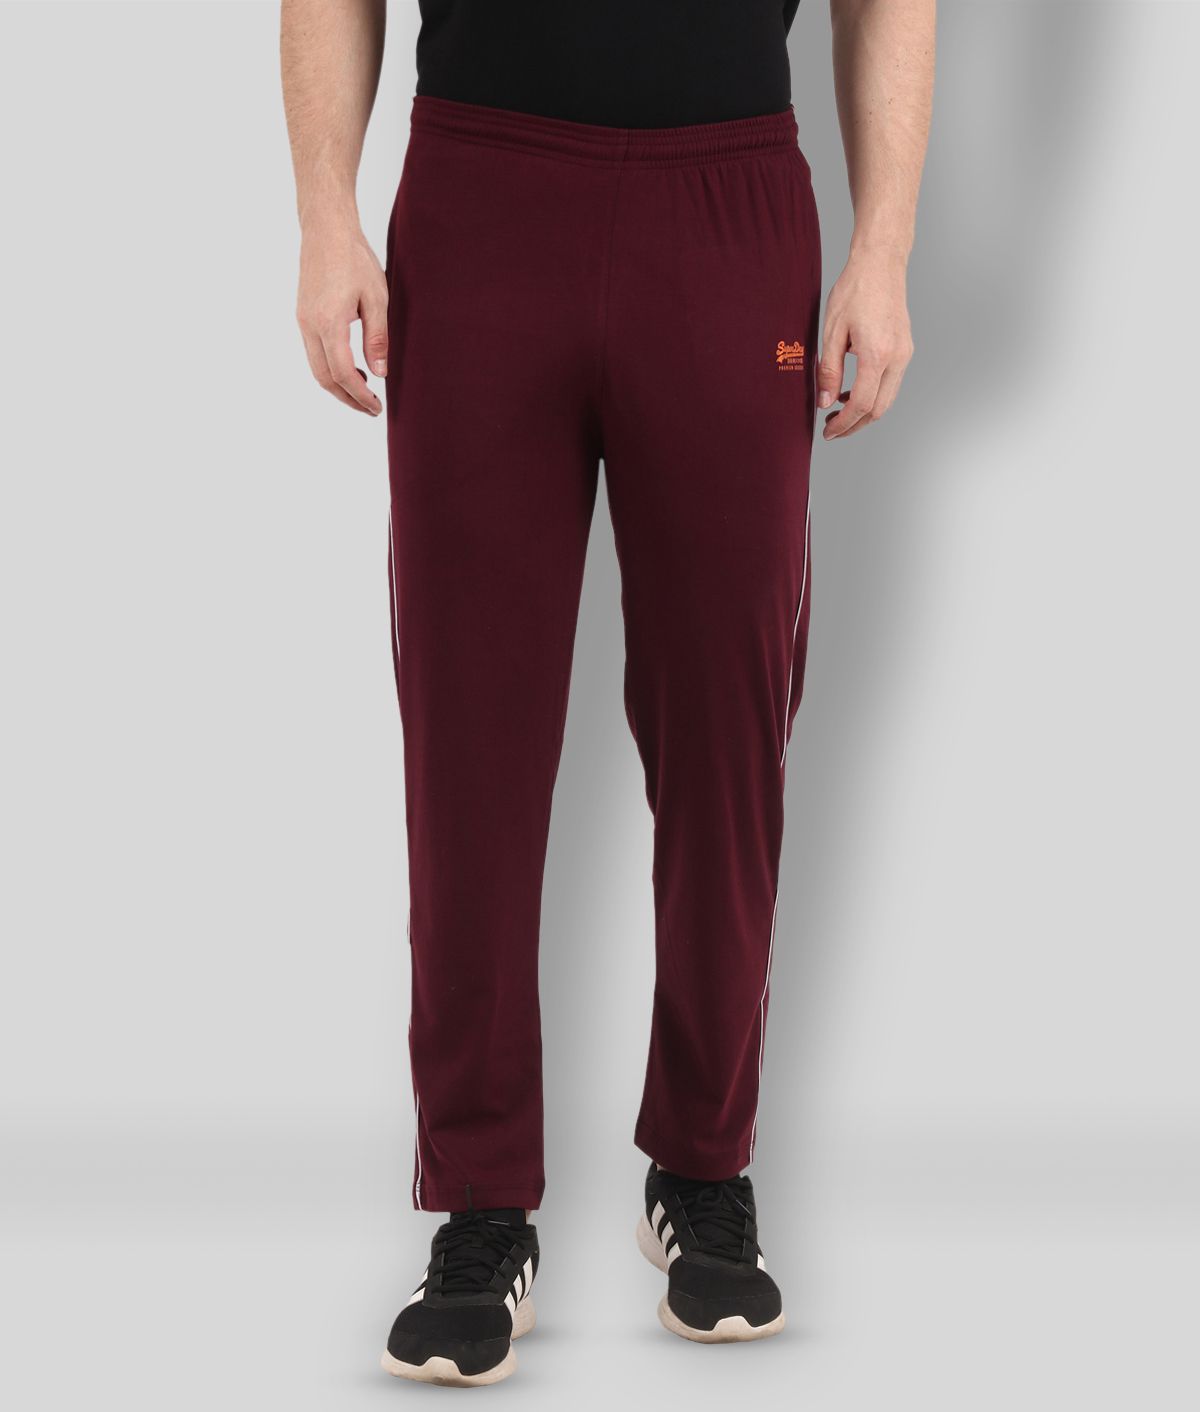 Miss Romina - Maroon Cotton Men's Trackpants ( Pack of 1 )